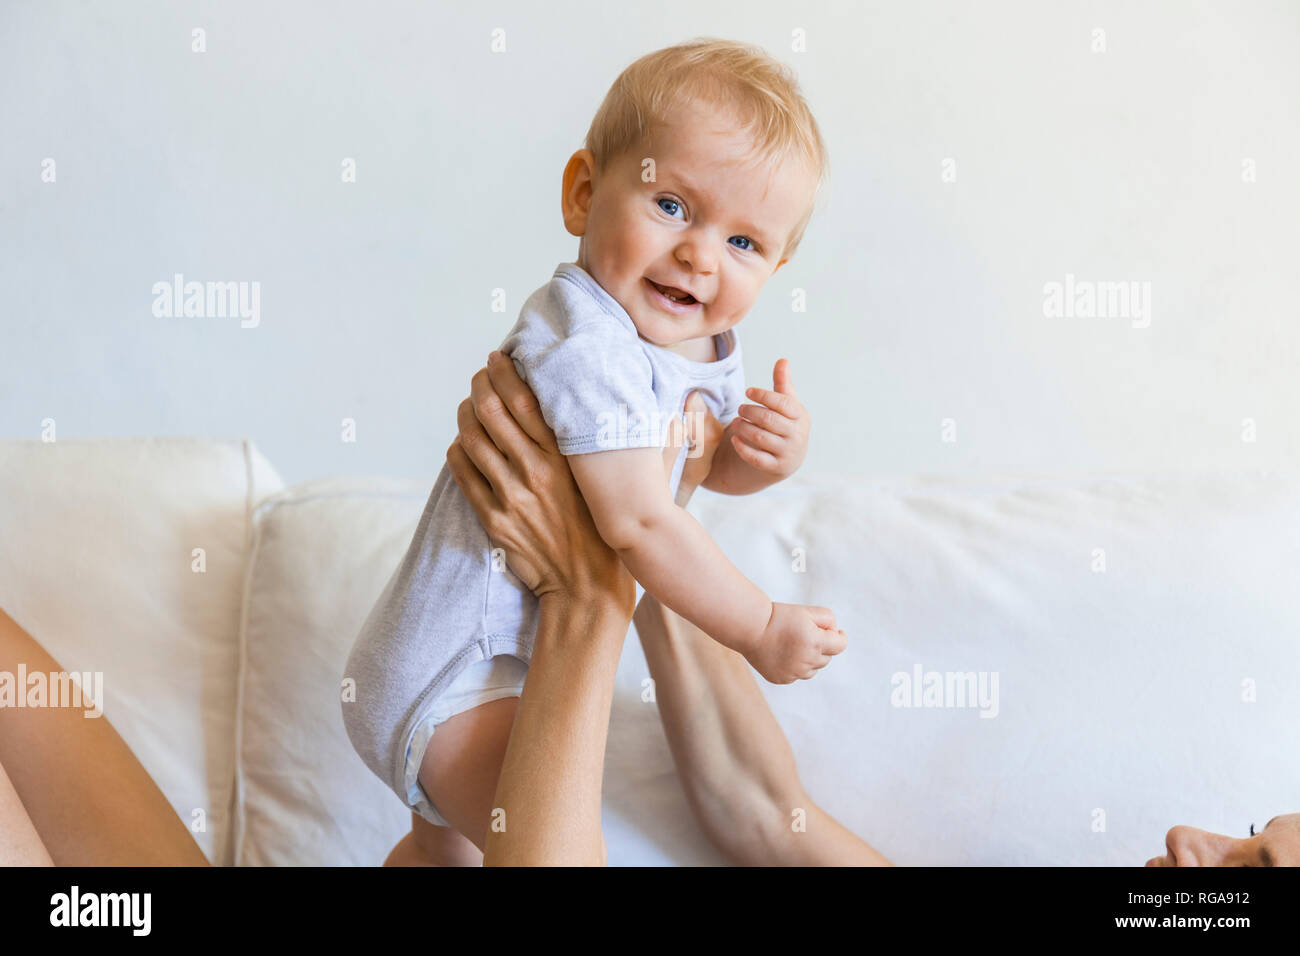 Portrait of happy baby girl held by her mother Stock Photo